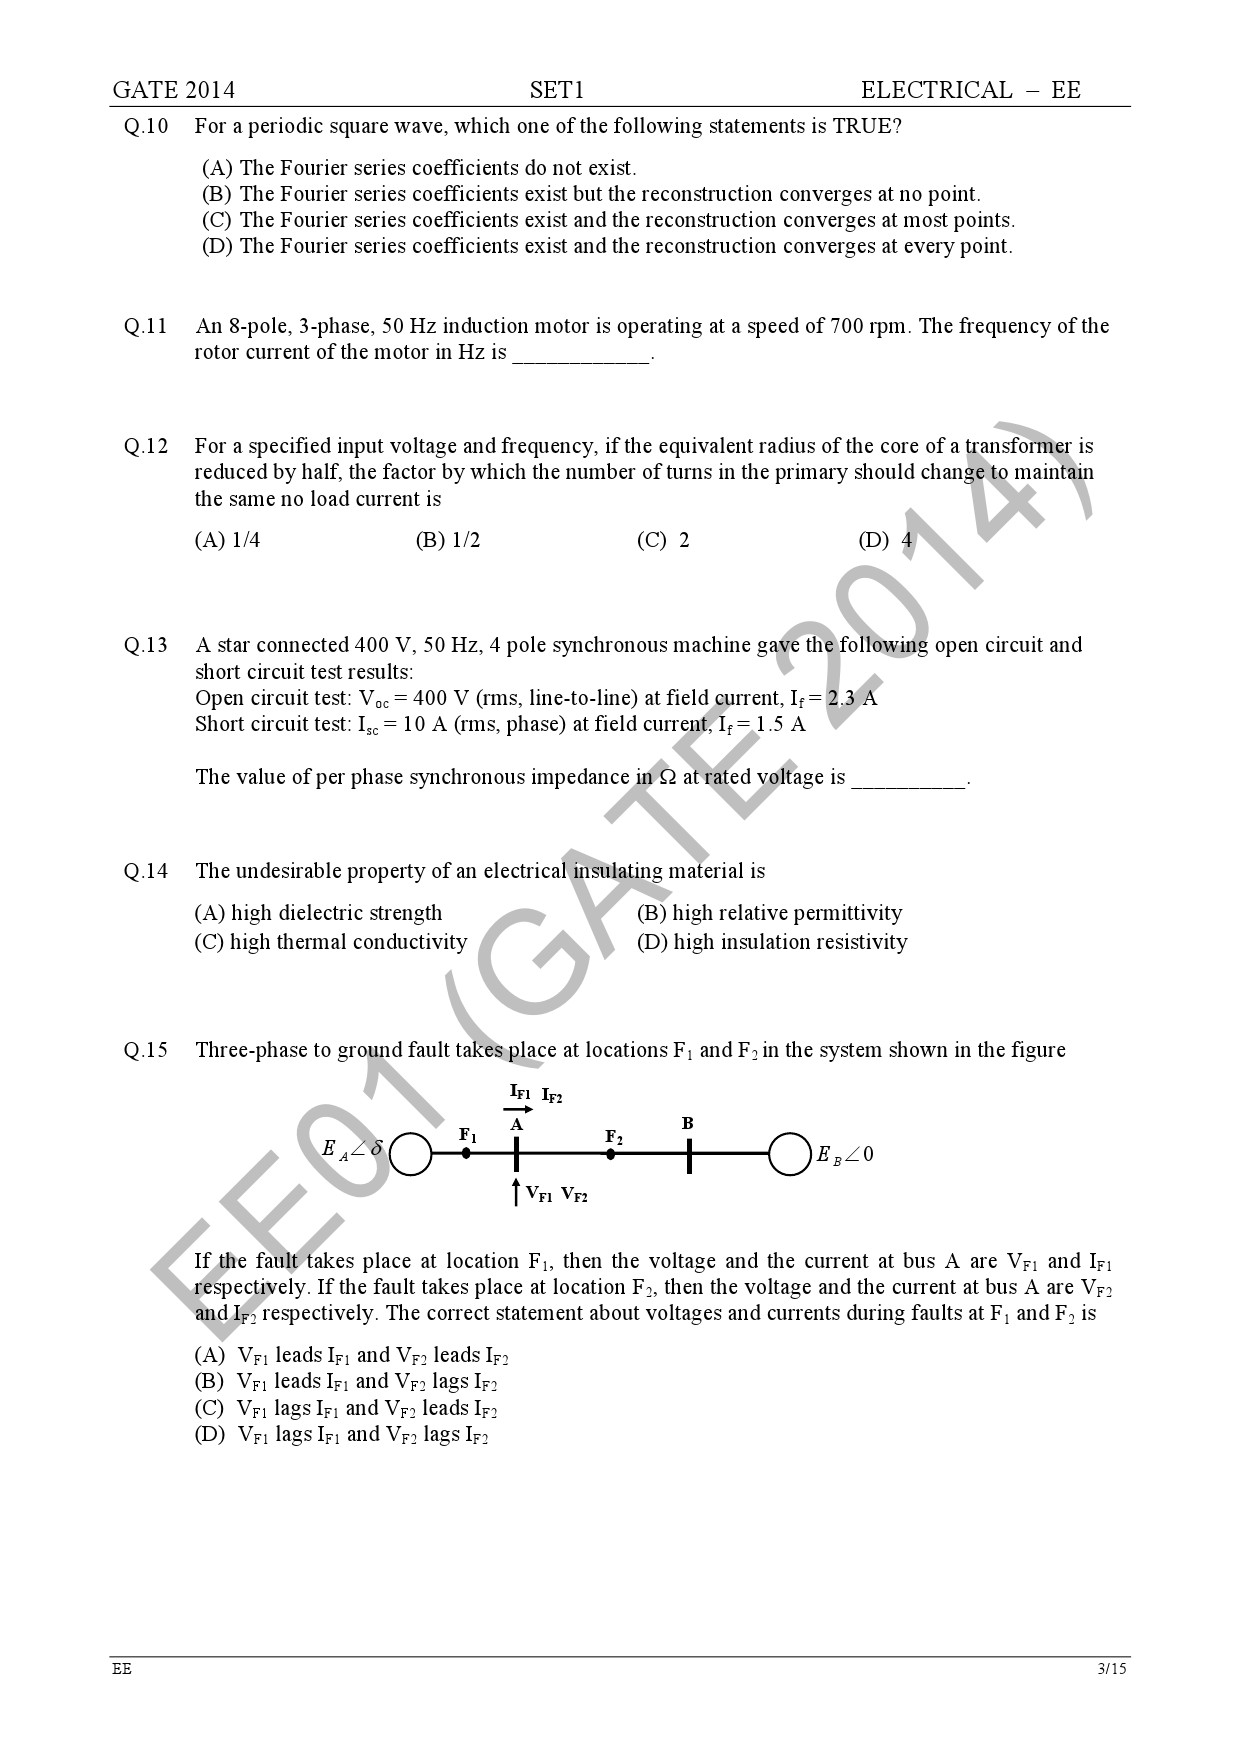 GATE Exam Question Paper 2014 Electrical Engineering Set 1 9